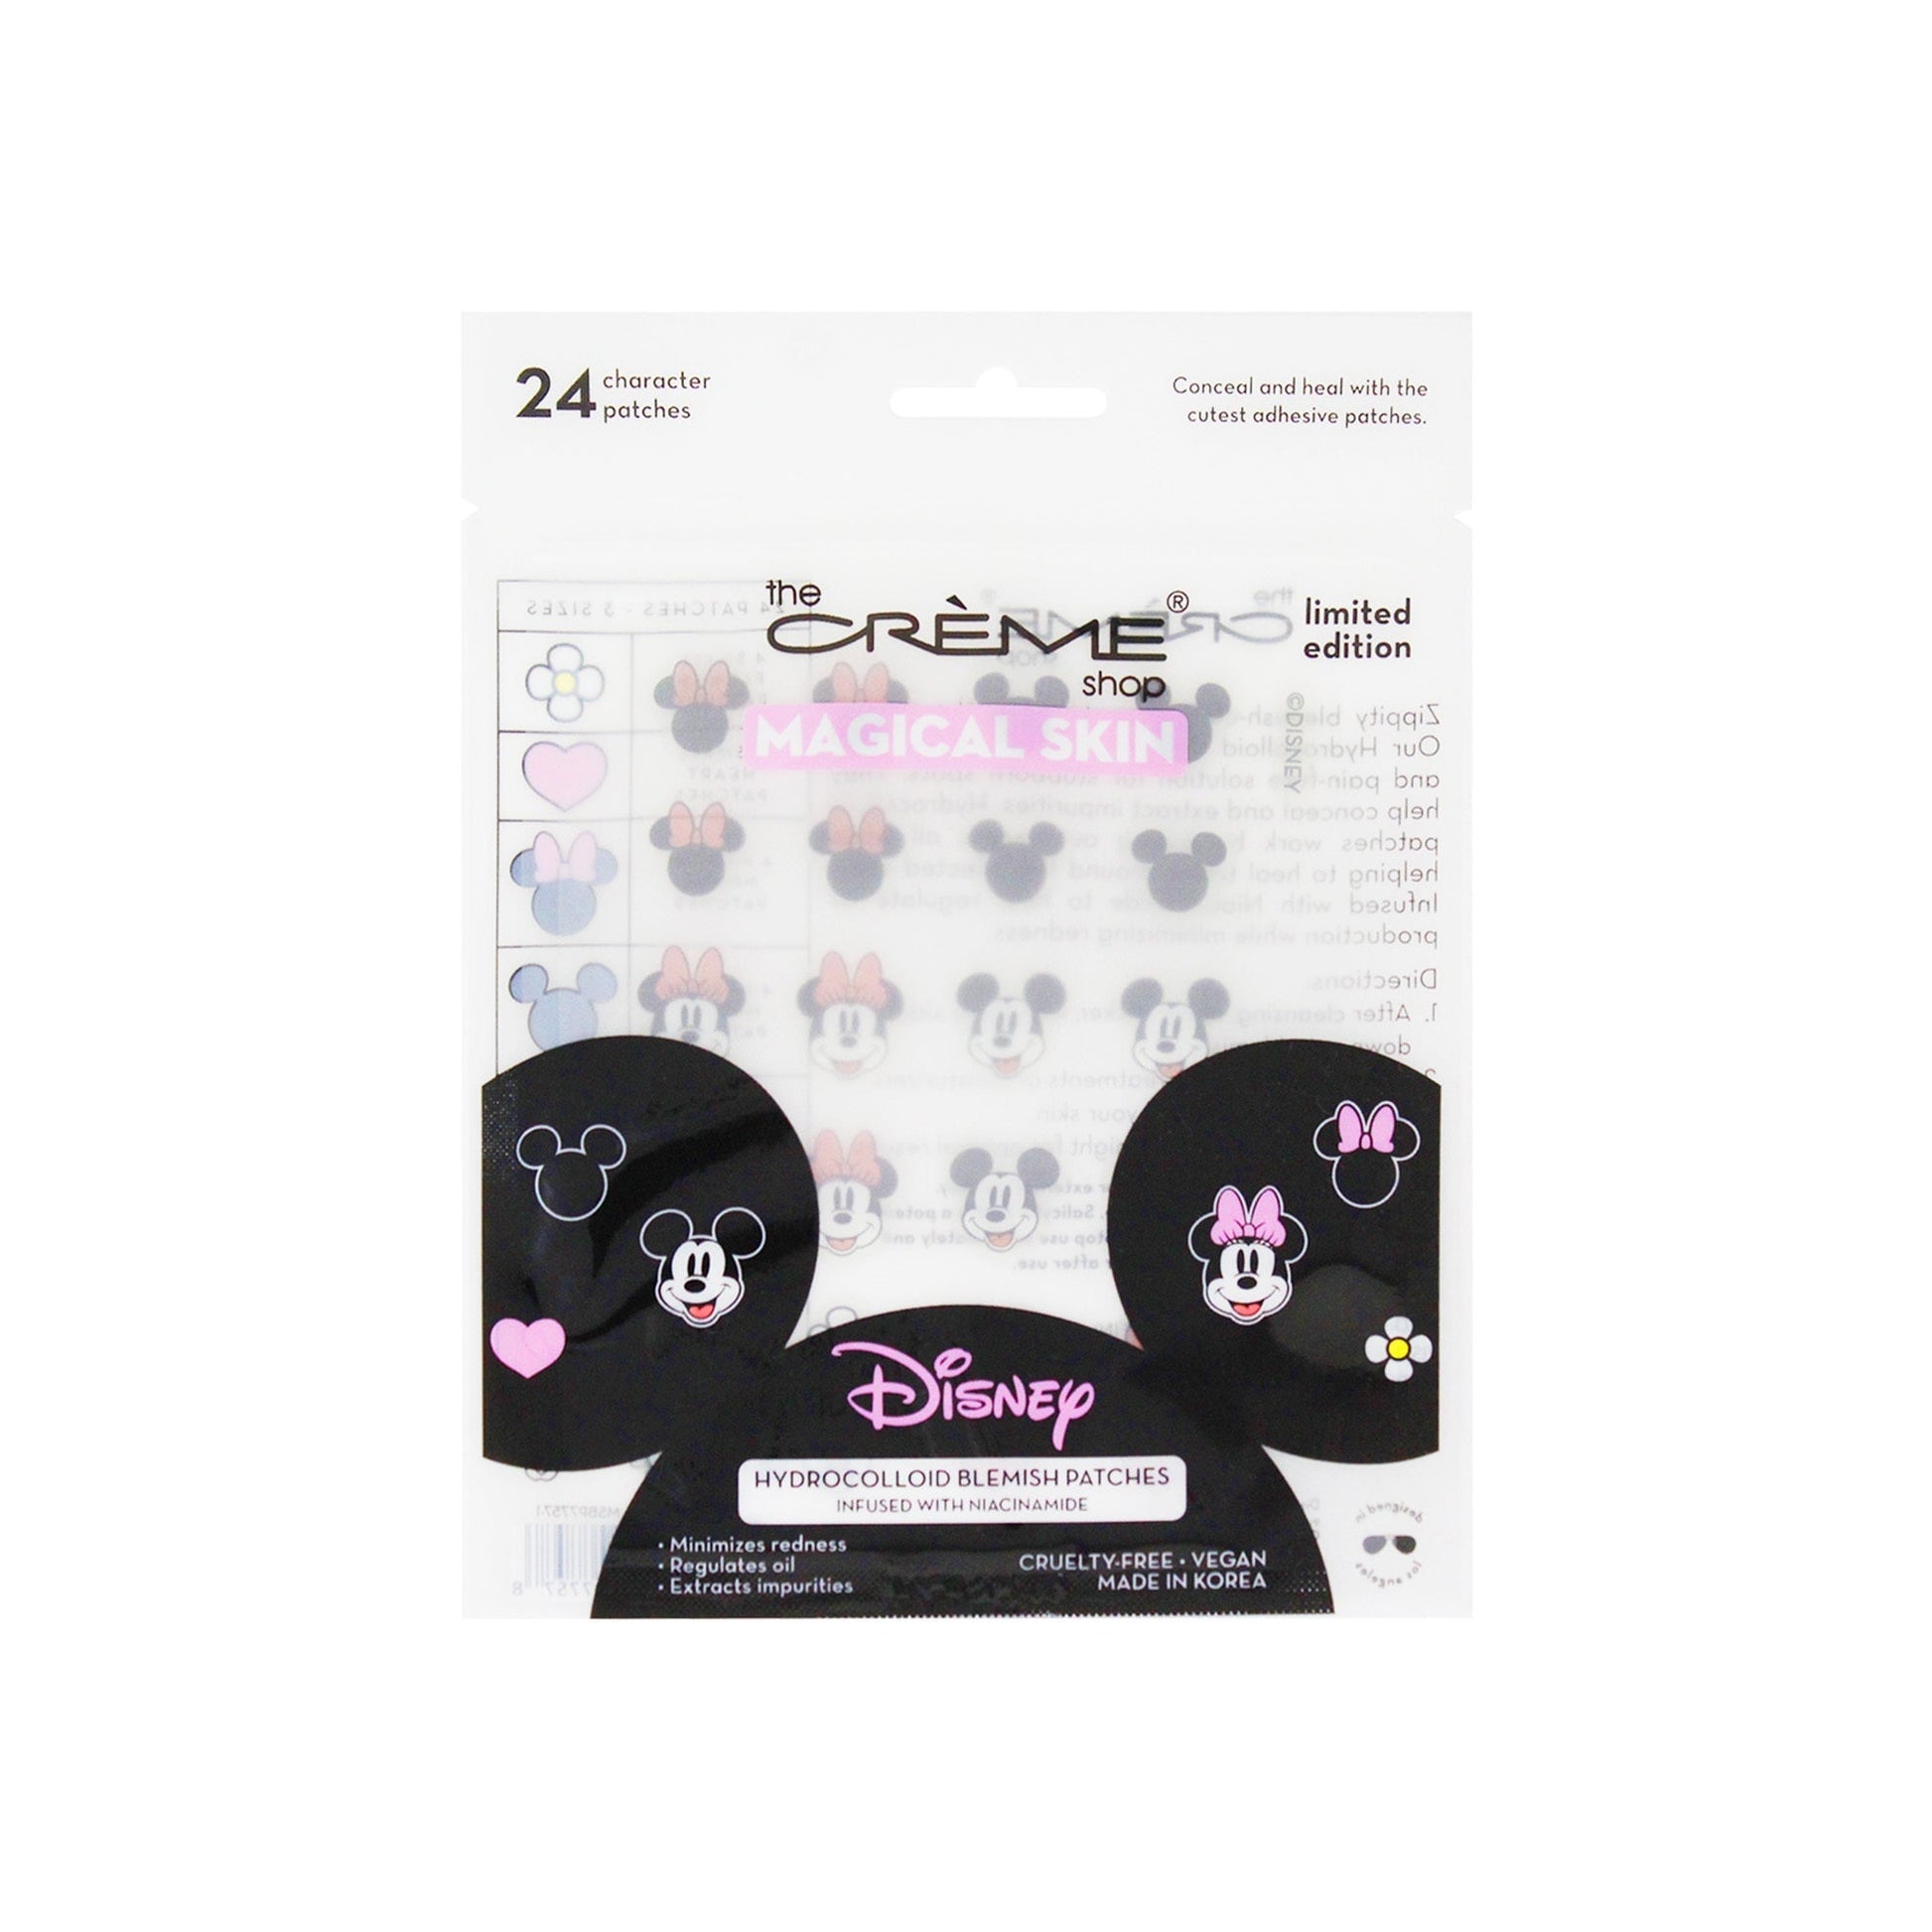 Minnie Mouse Magical Skin Hydrocolloid Blemish Patches Hydrocolloid Acne Patches The Crème Shop x Disney 